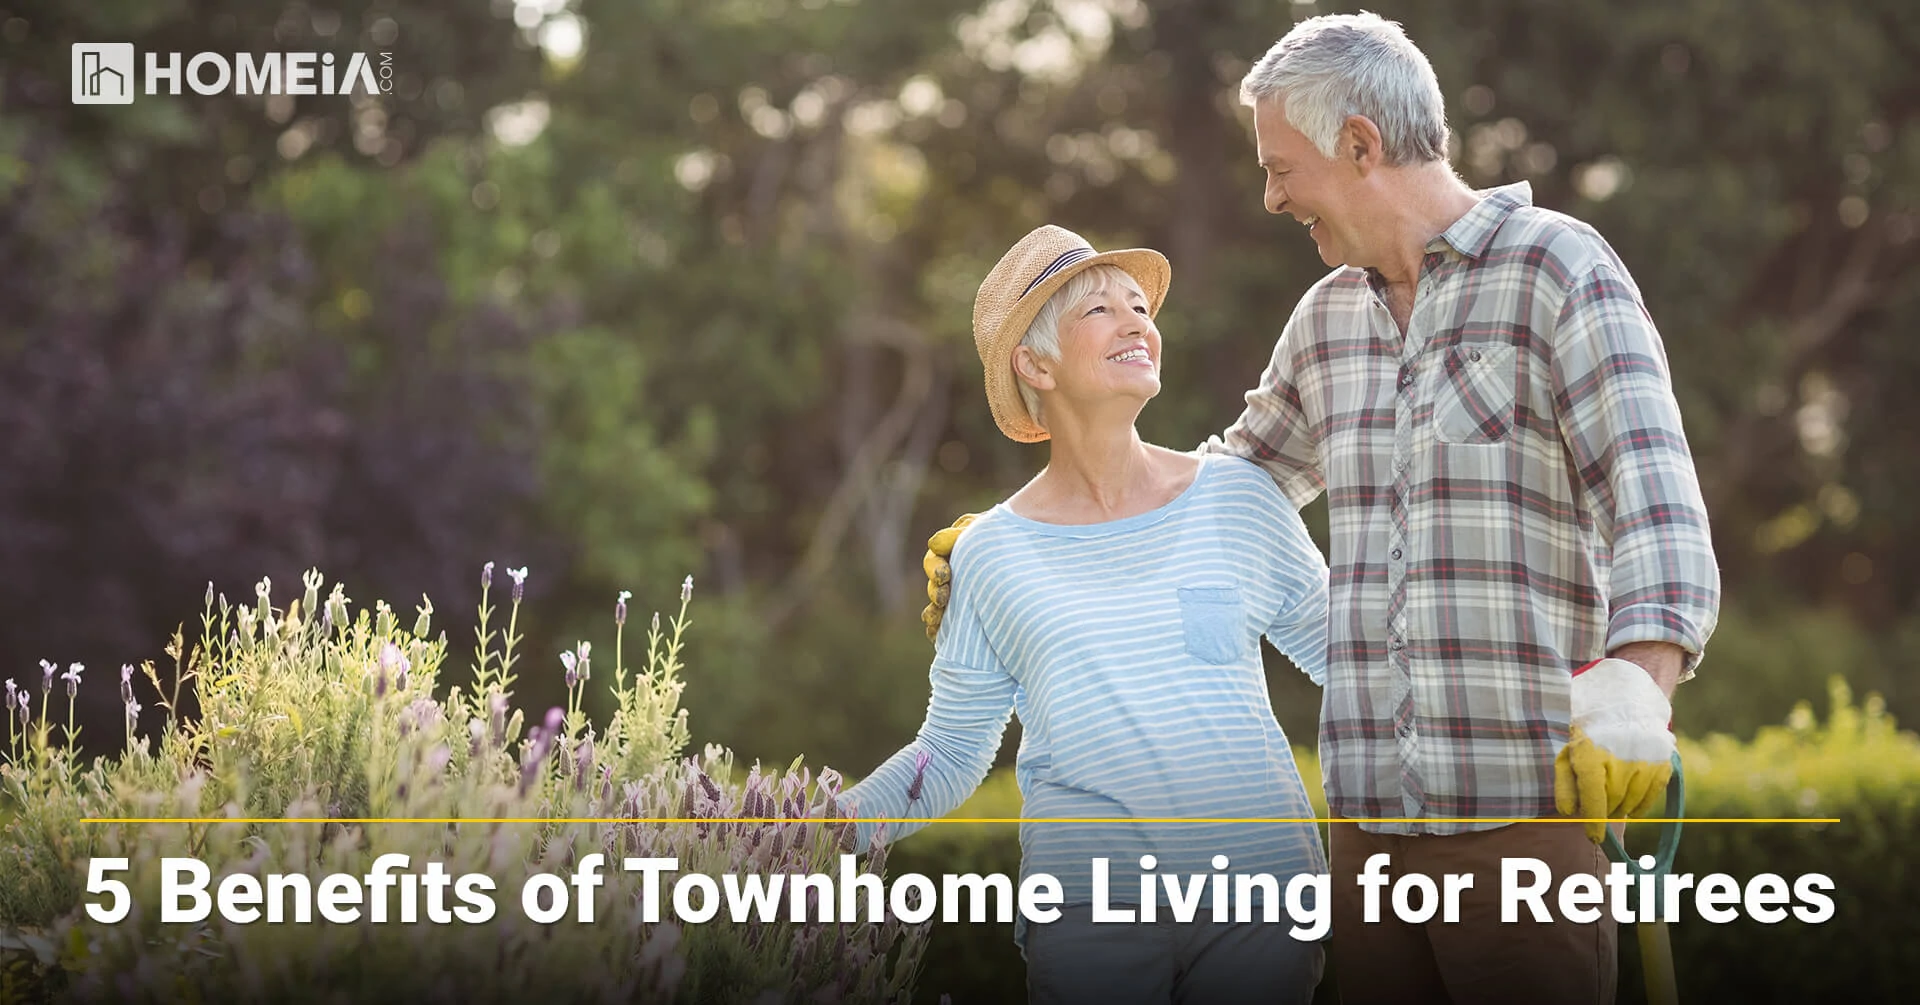 5 Benefits of Townhome Living for Retirees